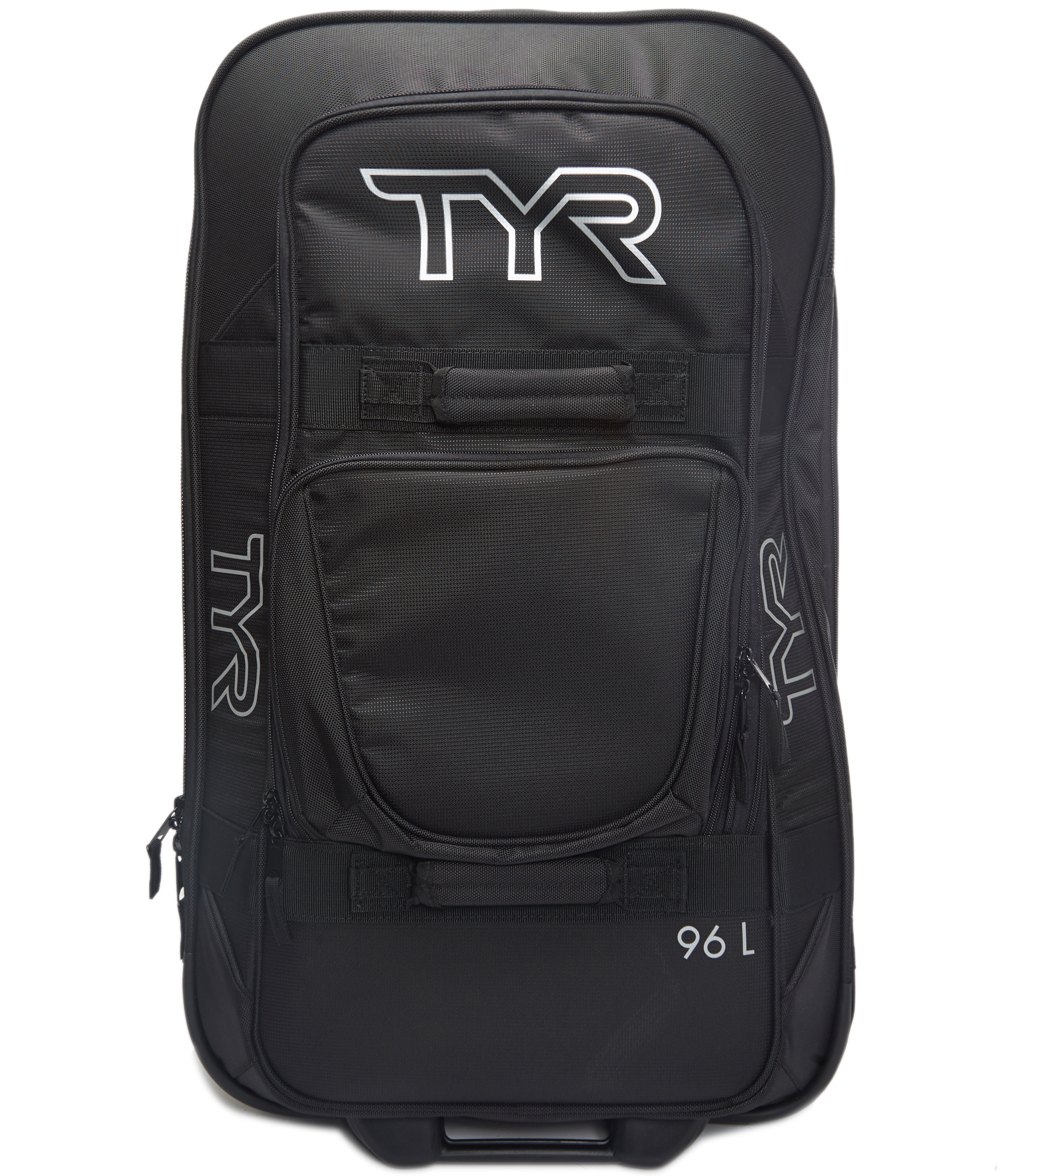 TYR Alliance Check-In Bag - Black - Swimoutlet.com